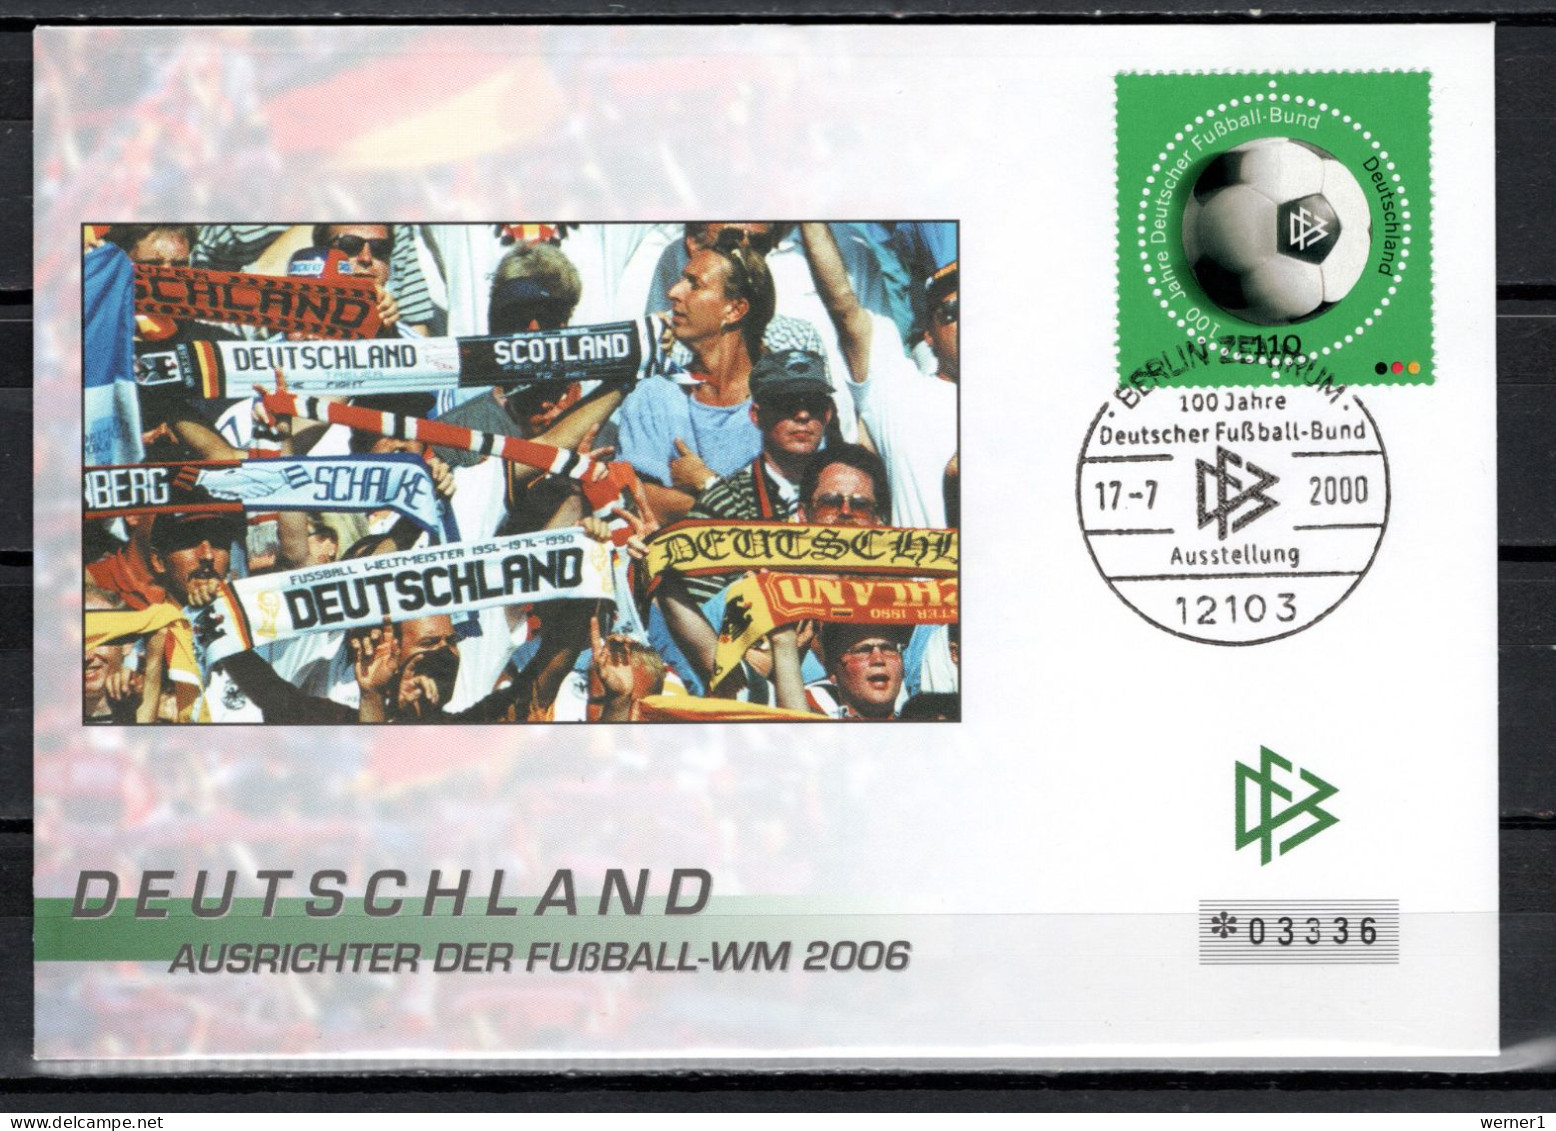 Germany 2000 Football Soccer World Cup Commemorative Cover - 2006 – Deutschland